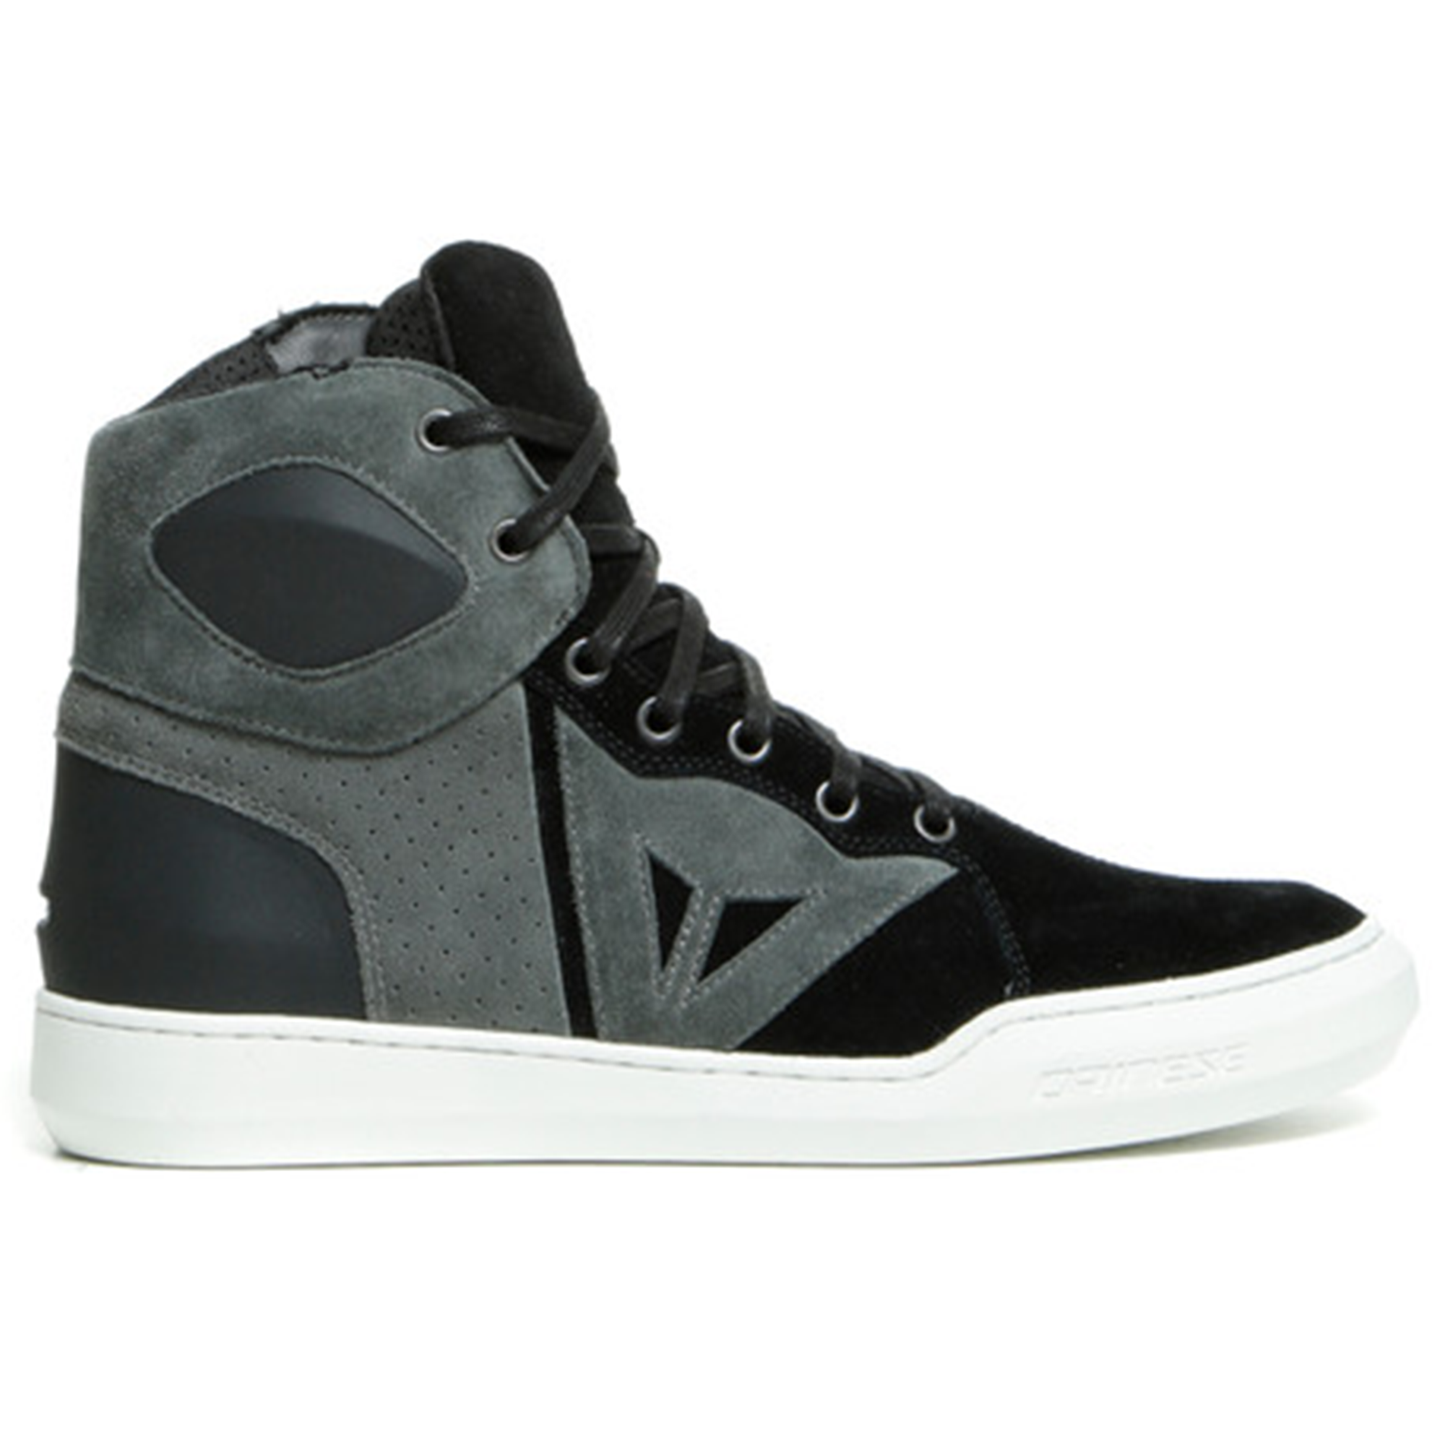 Dainese Atipica Air Shoes - Black/Anthracite